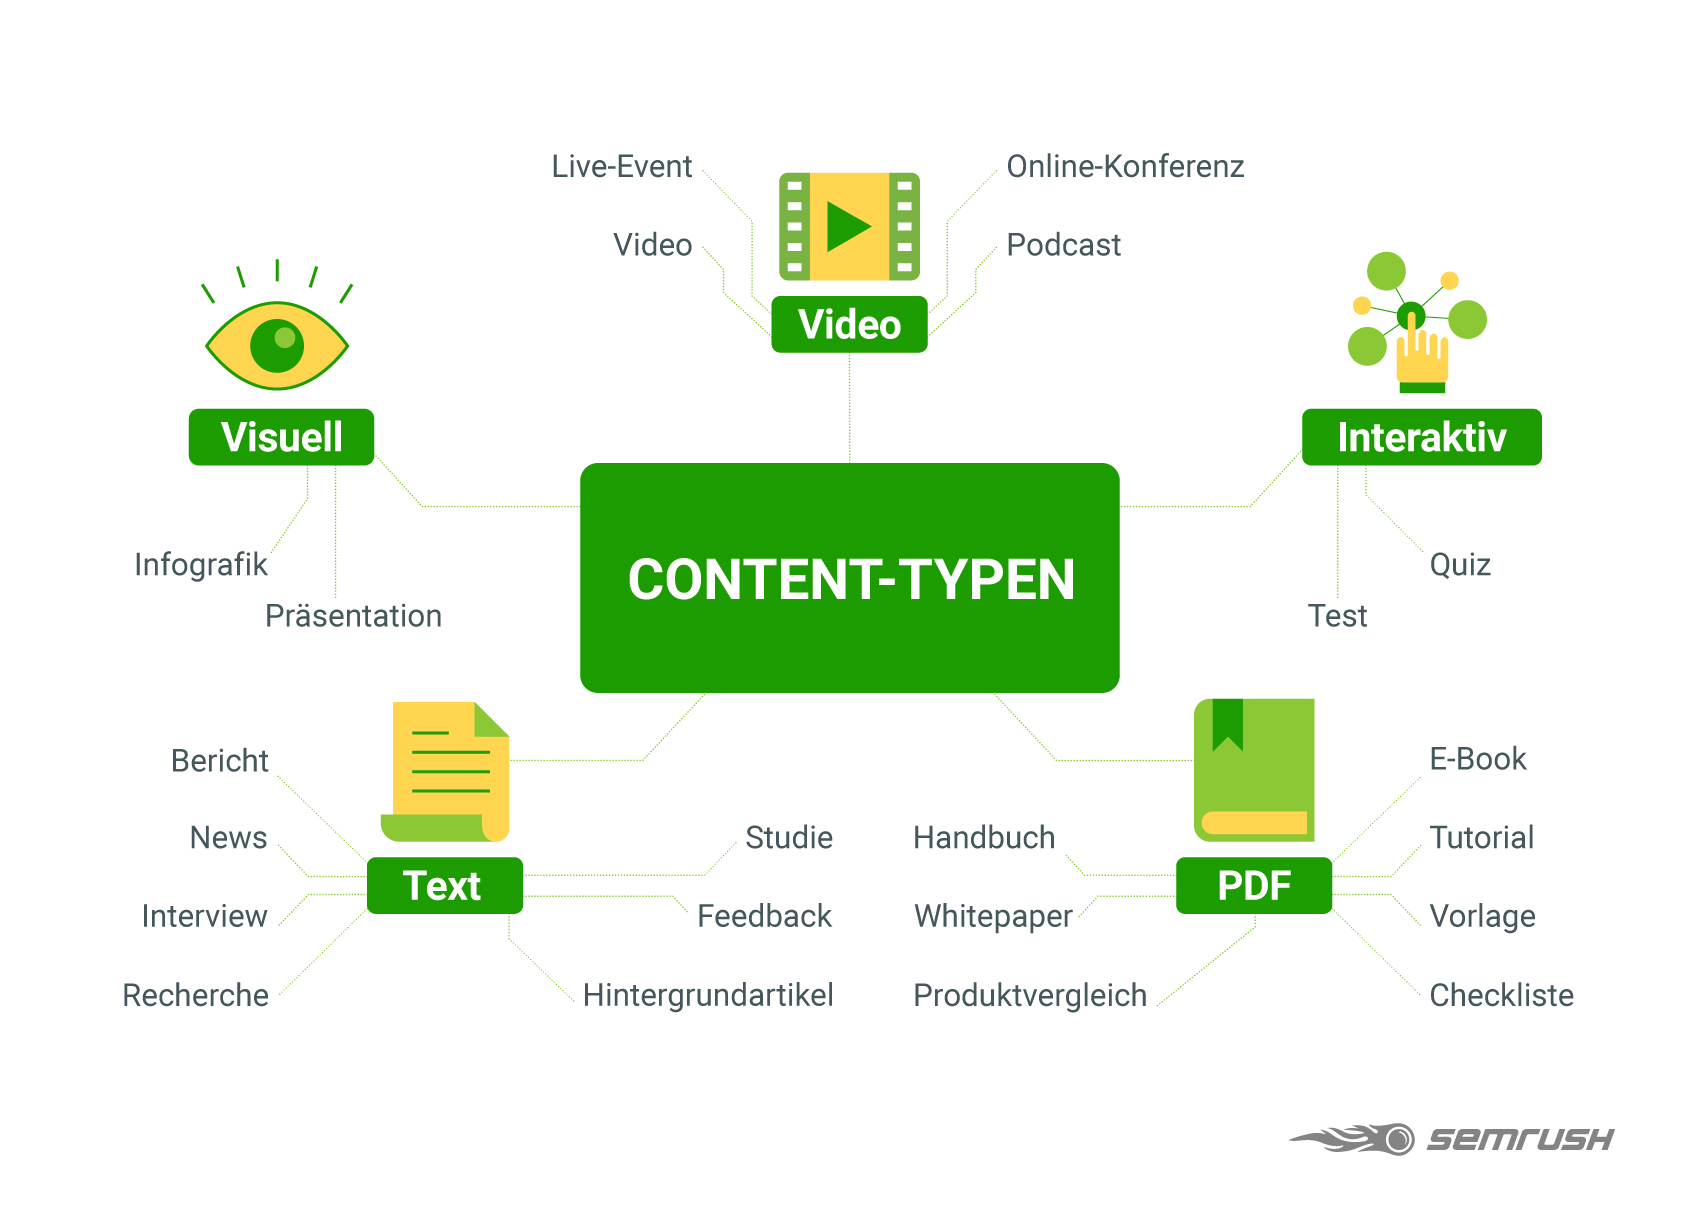 Offer your content in different formats